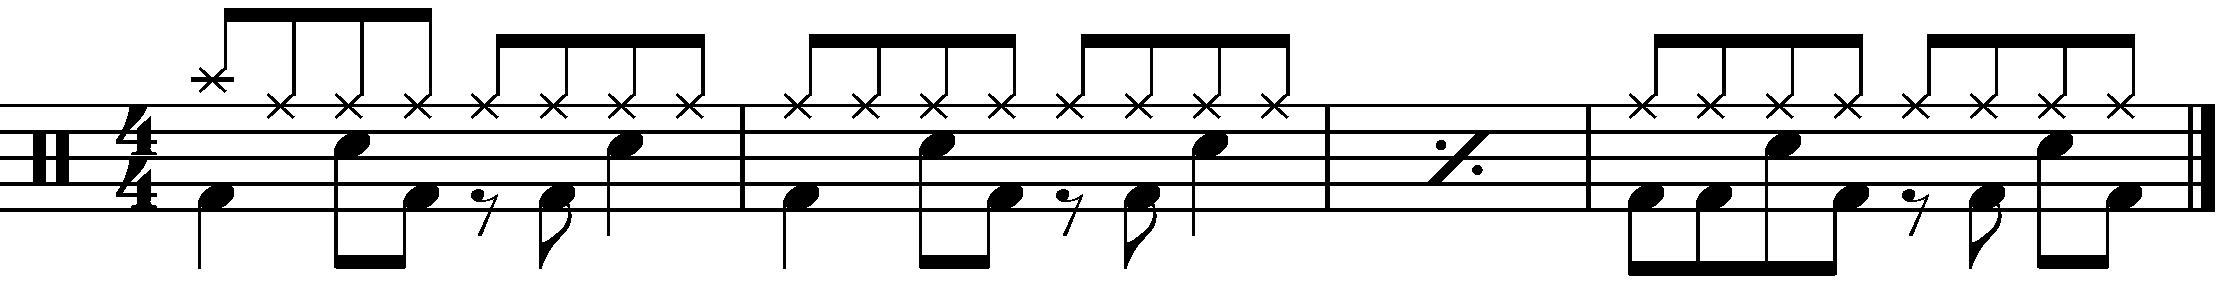 An A A A B example with a groove based fill